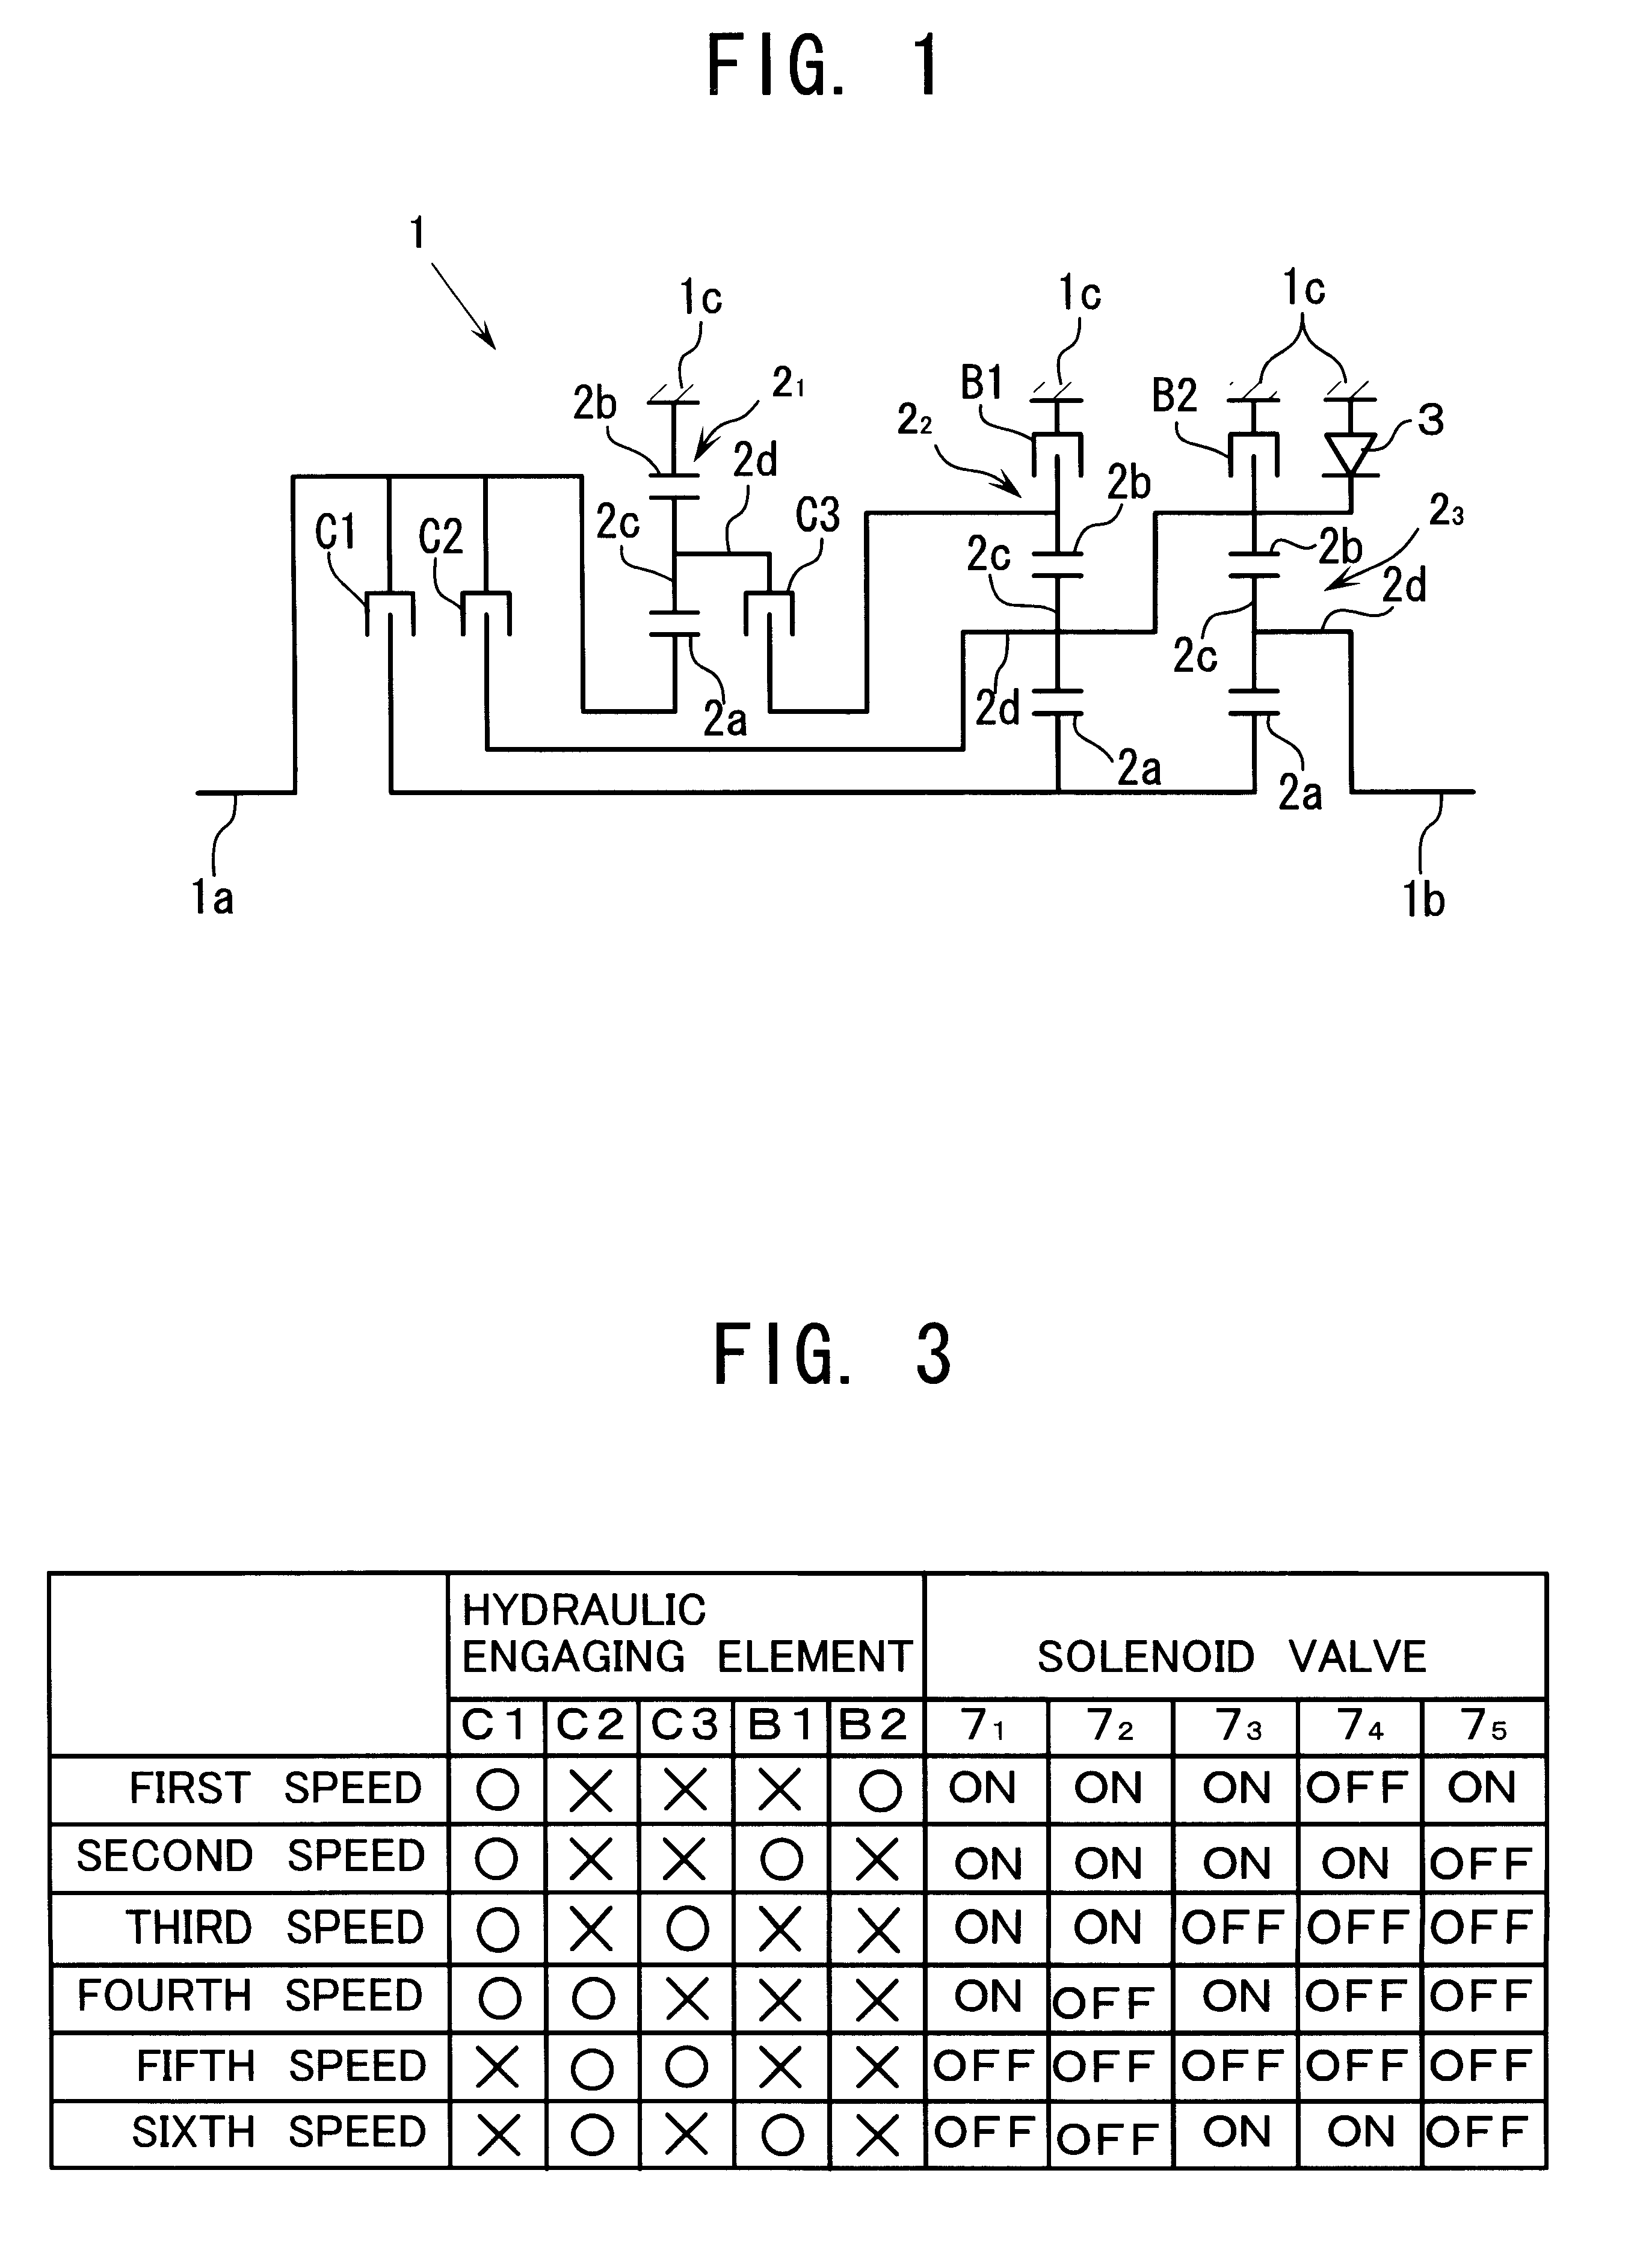 Control apparatus for automatic transmission of vehicle